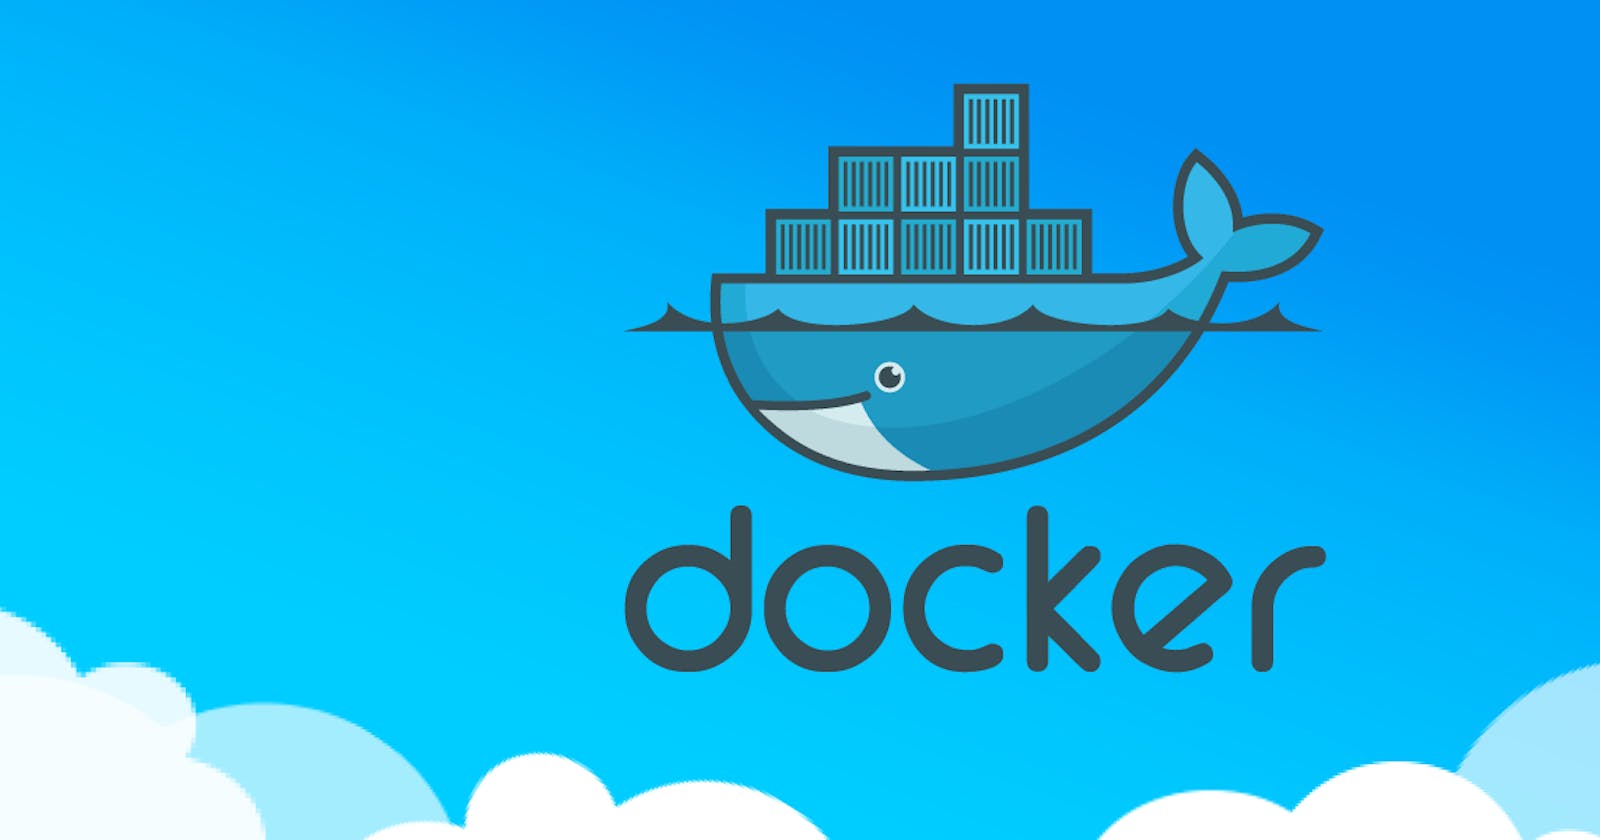 Docker Tutorial: Quick, Easy & Effective Guide to Get Started Developing Go Apps